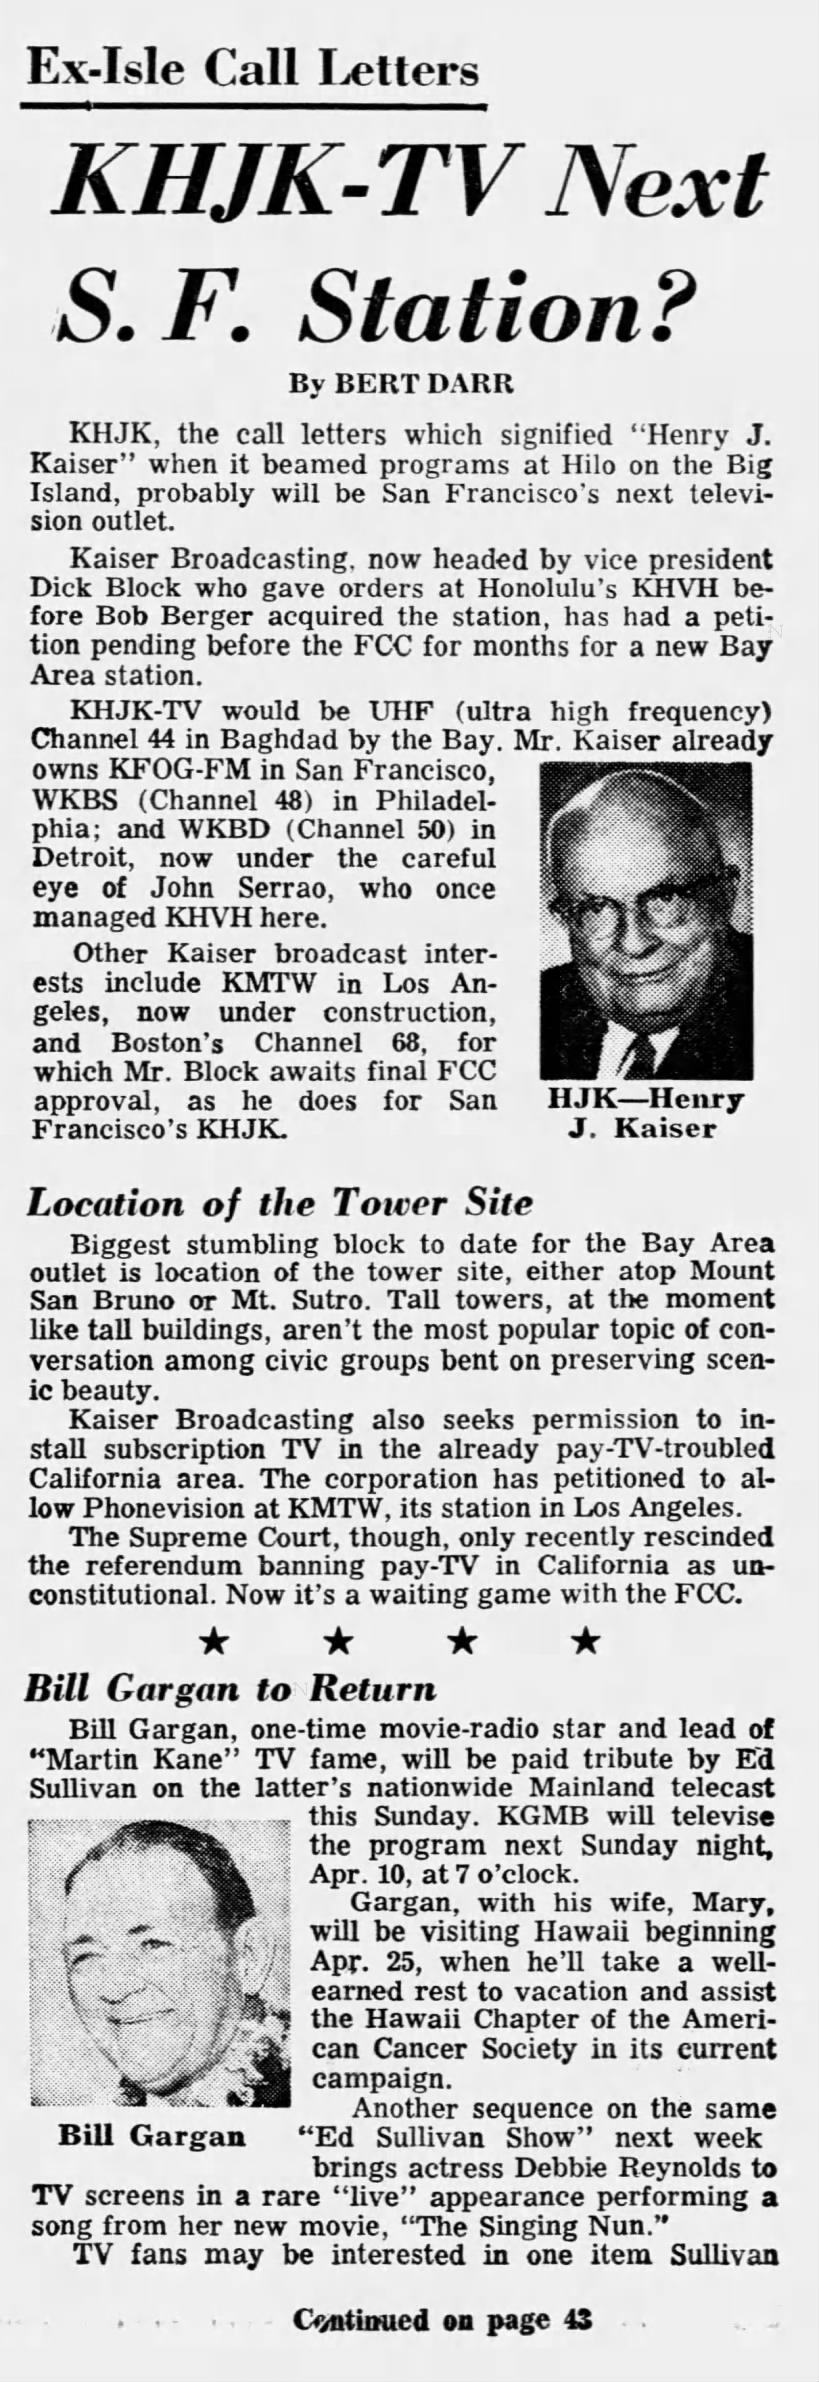 Ex-Isle Call Letters: KHJK-TV Next S. F. Station?